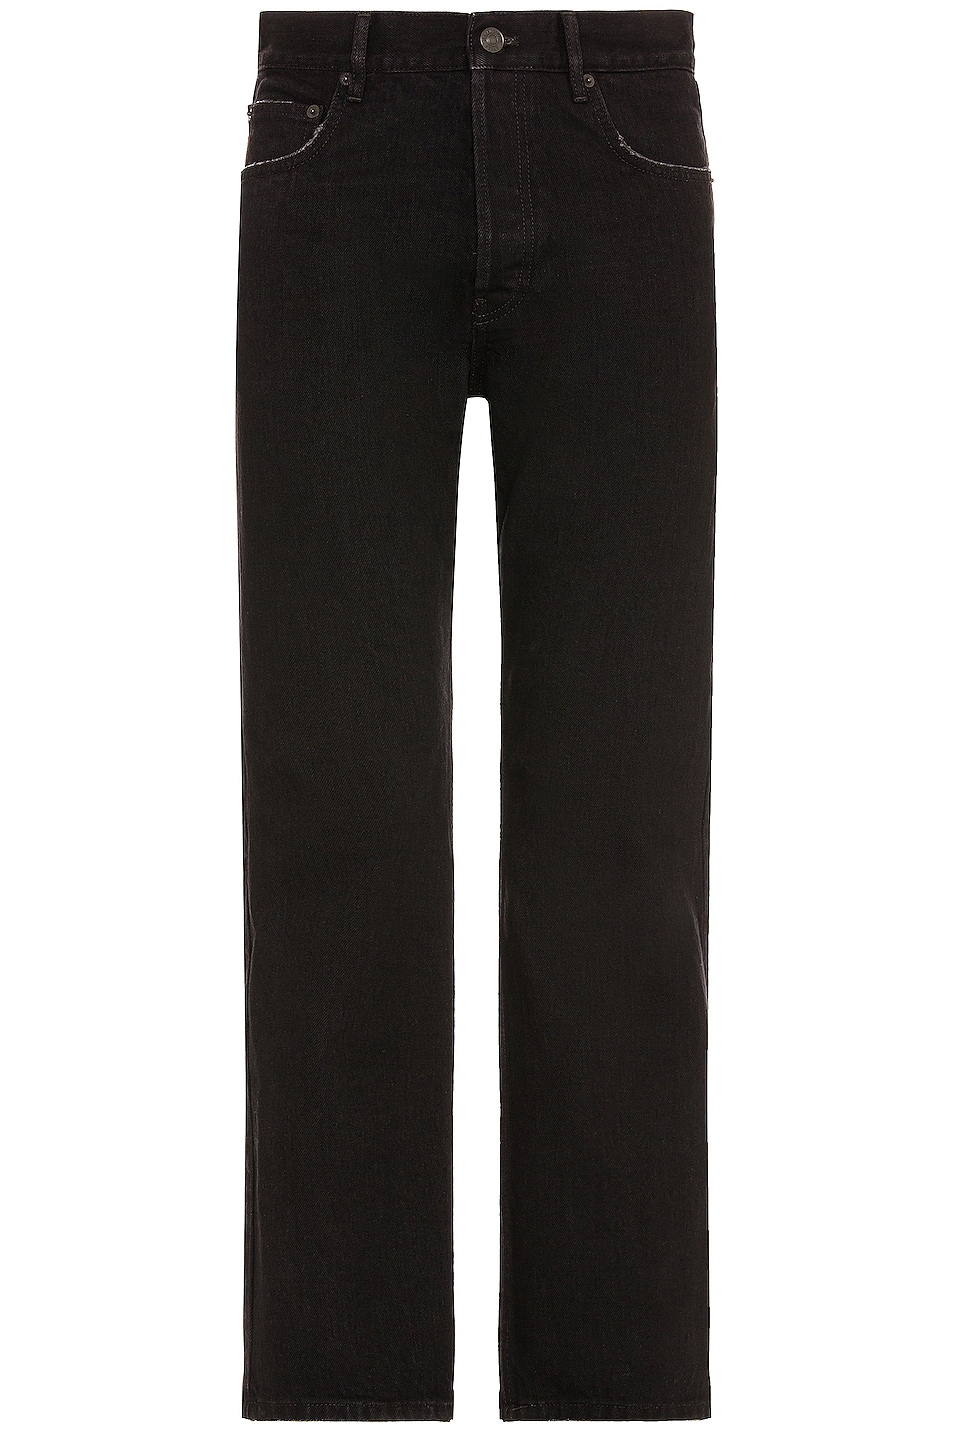 Image 1 of Balenciaga Slim Fit Pants in Rubber Black